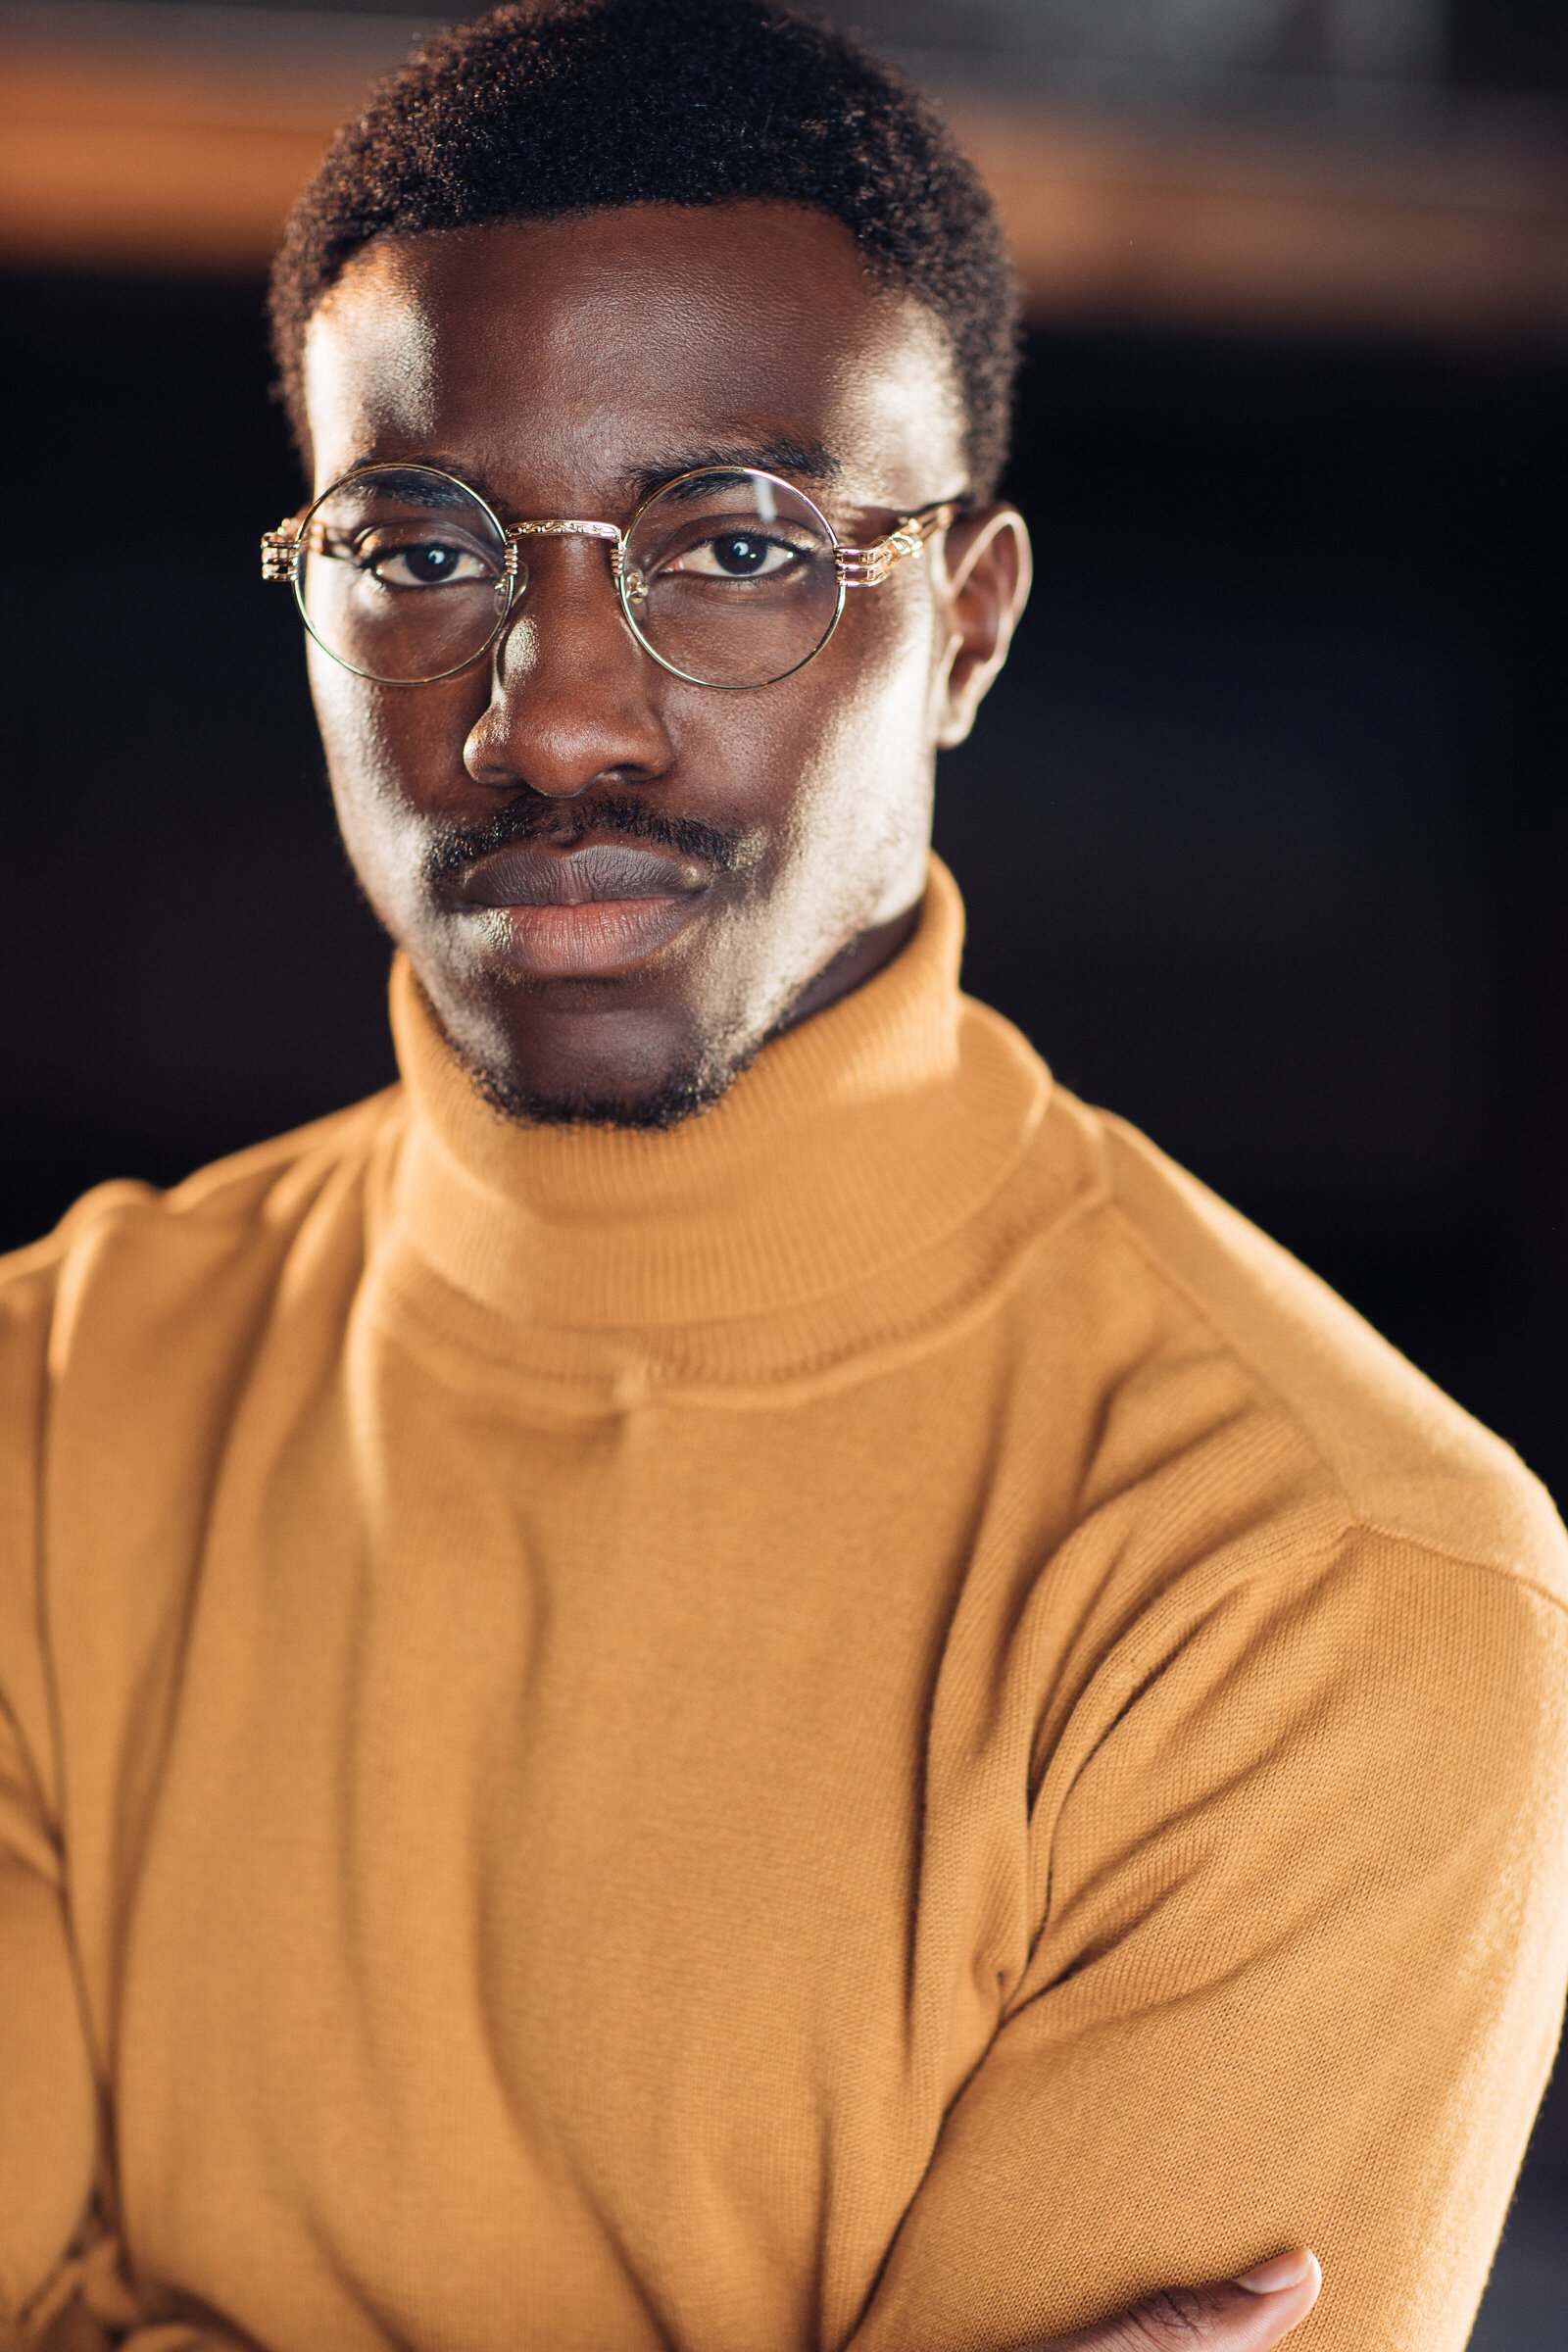 Headshot Photograph Of Young Black Man In Yellow Turtle Neck Sweater Los Angeles